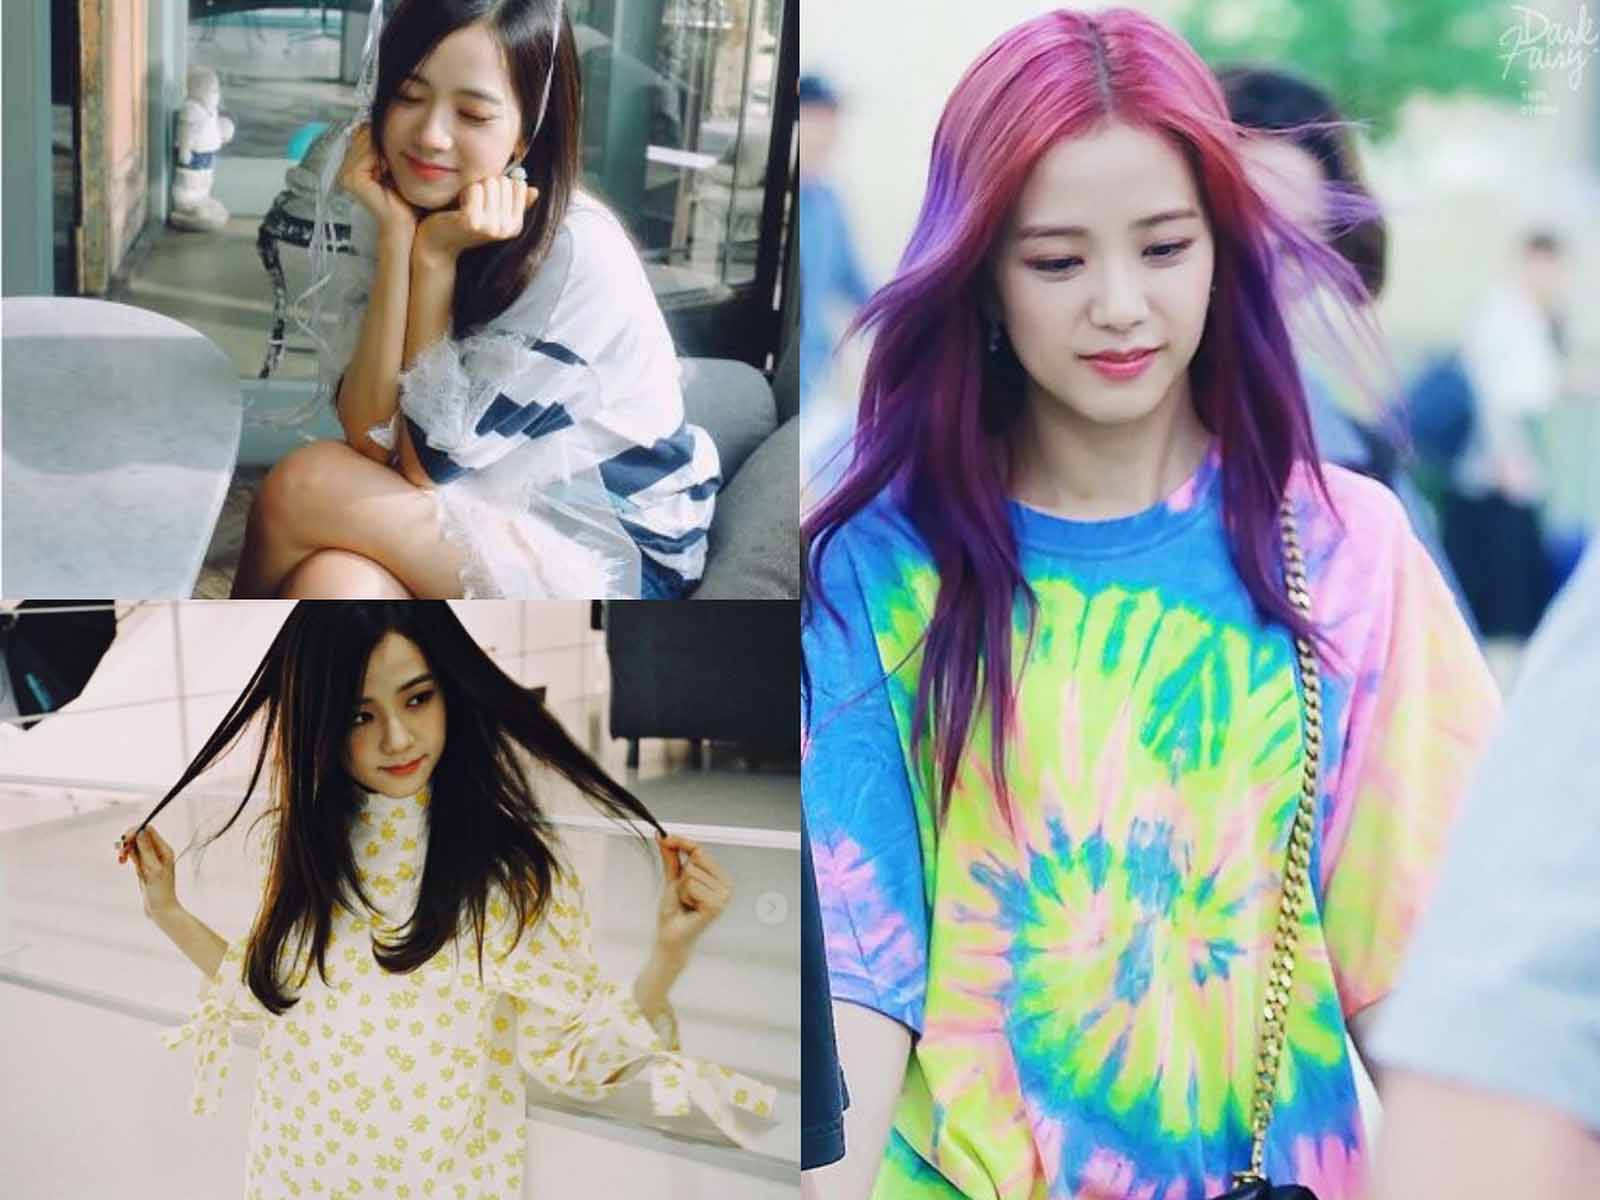 BLACKPINK's style is so hypnotic, there's no surprise the members are leaders in the fashion world. Go behind the style of Jennie, Lisa, Rose, and Jisoo.